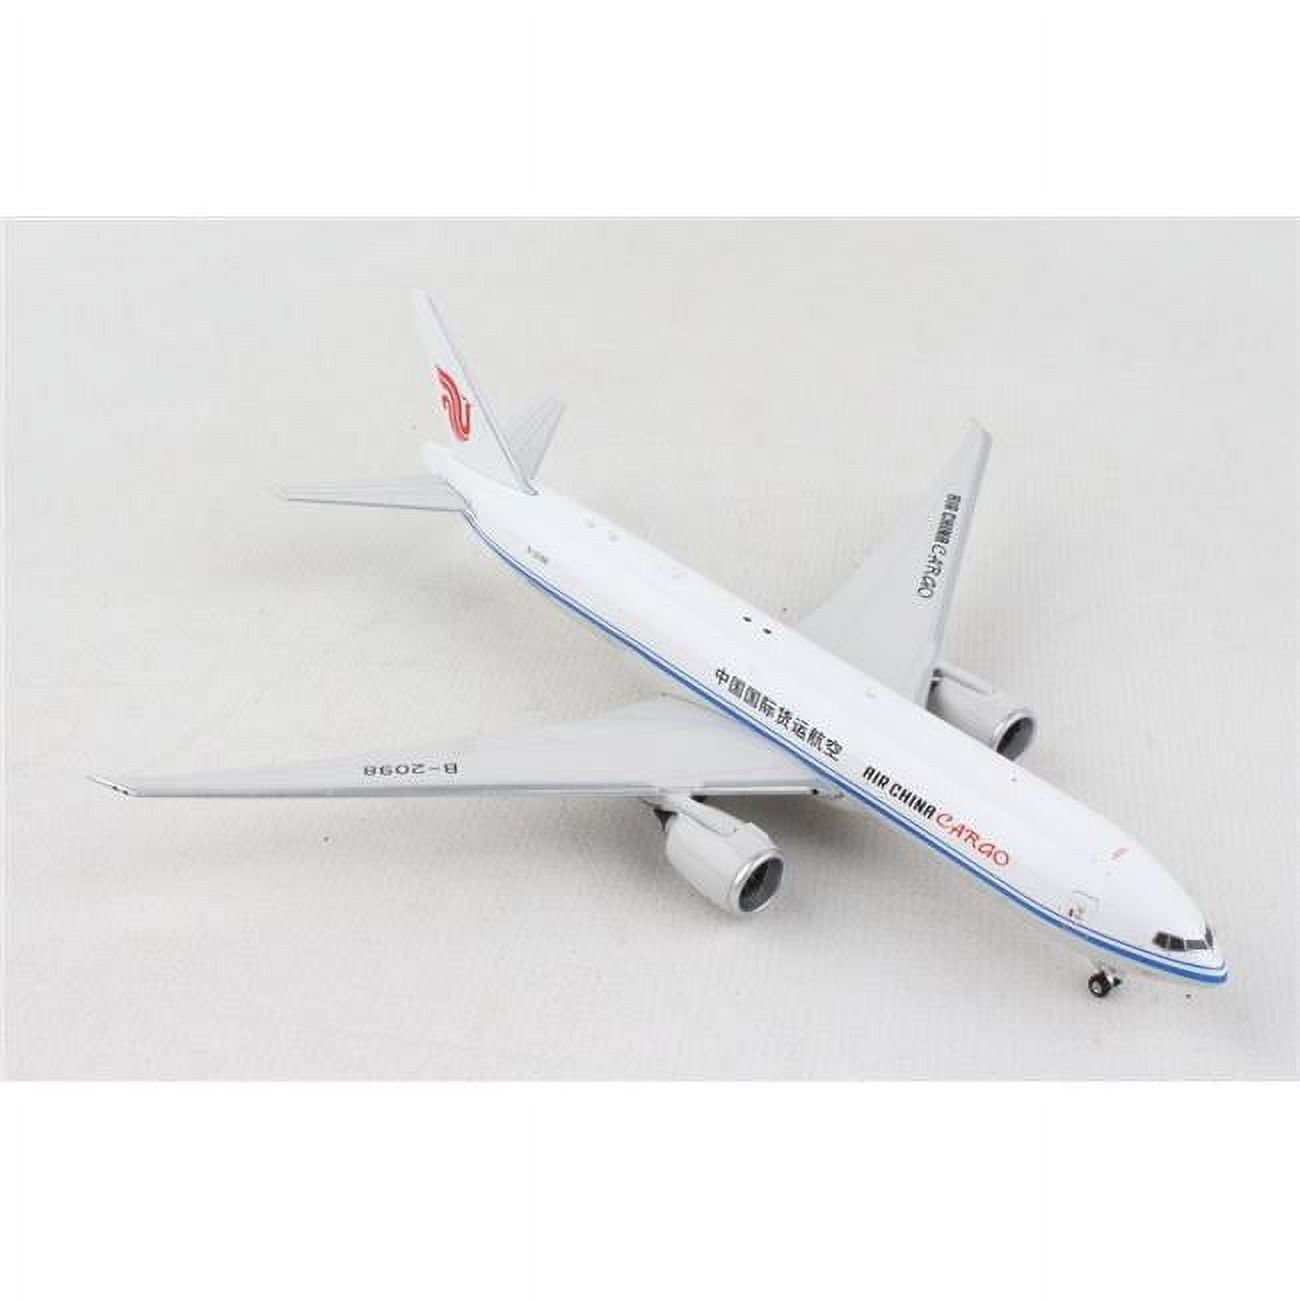 Picture of Phoenix PH2208 1-400 Scale Registration No.B-2098 Phoenix Air China Cargo 777F Model Aircraft Toy